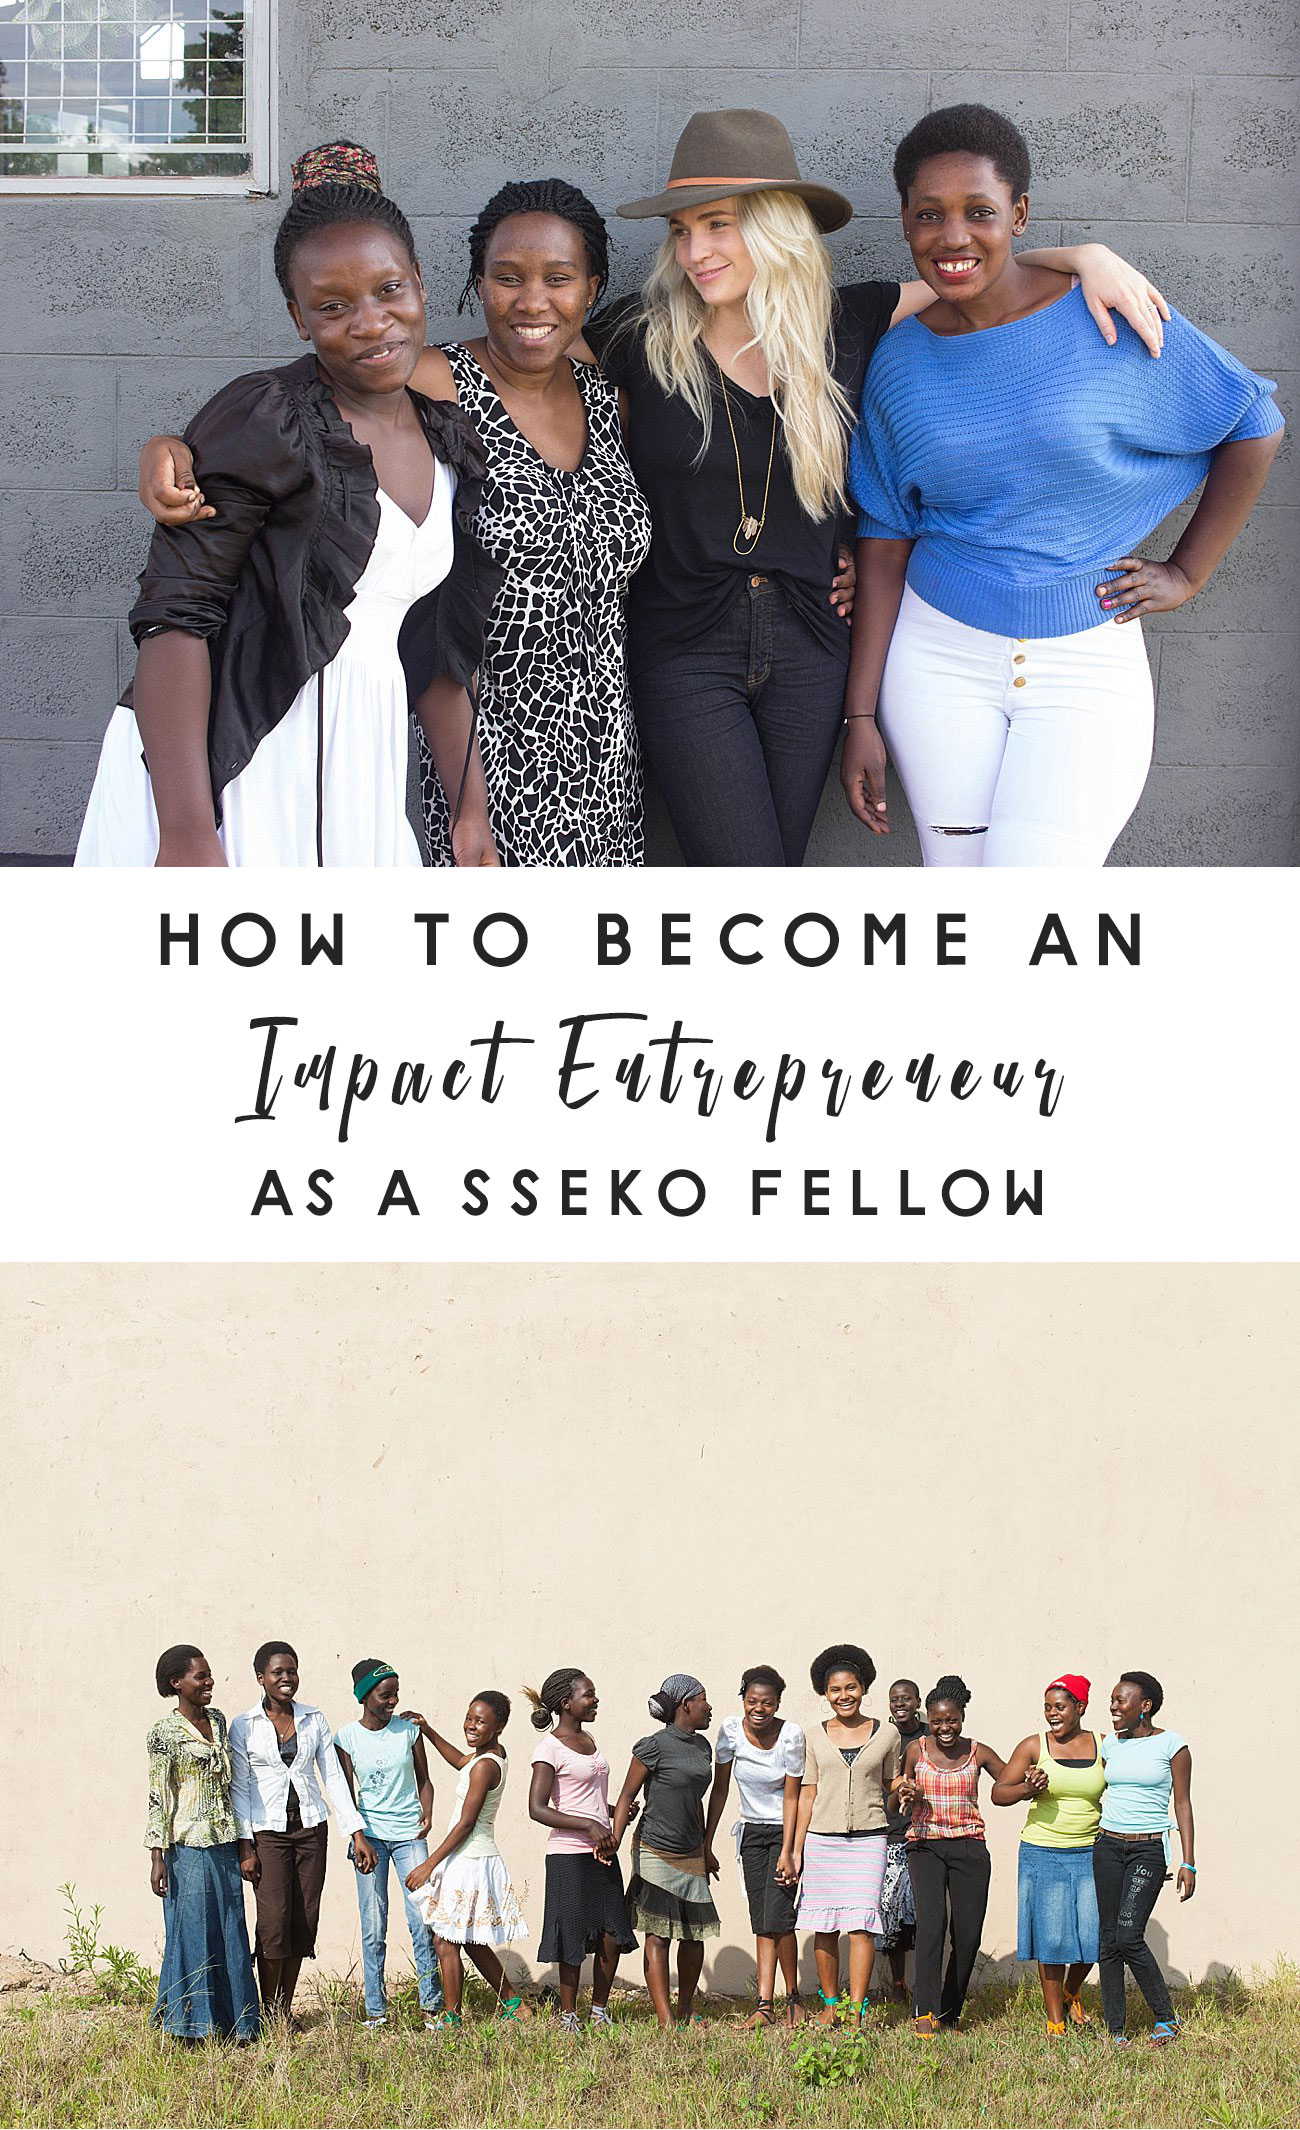 How to Become Impact Entrepreneurs with the Sseko Fellows Program by ethical fashion blogger Still Being Molly